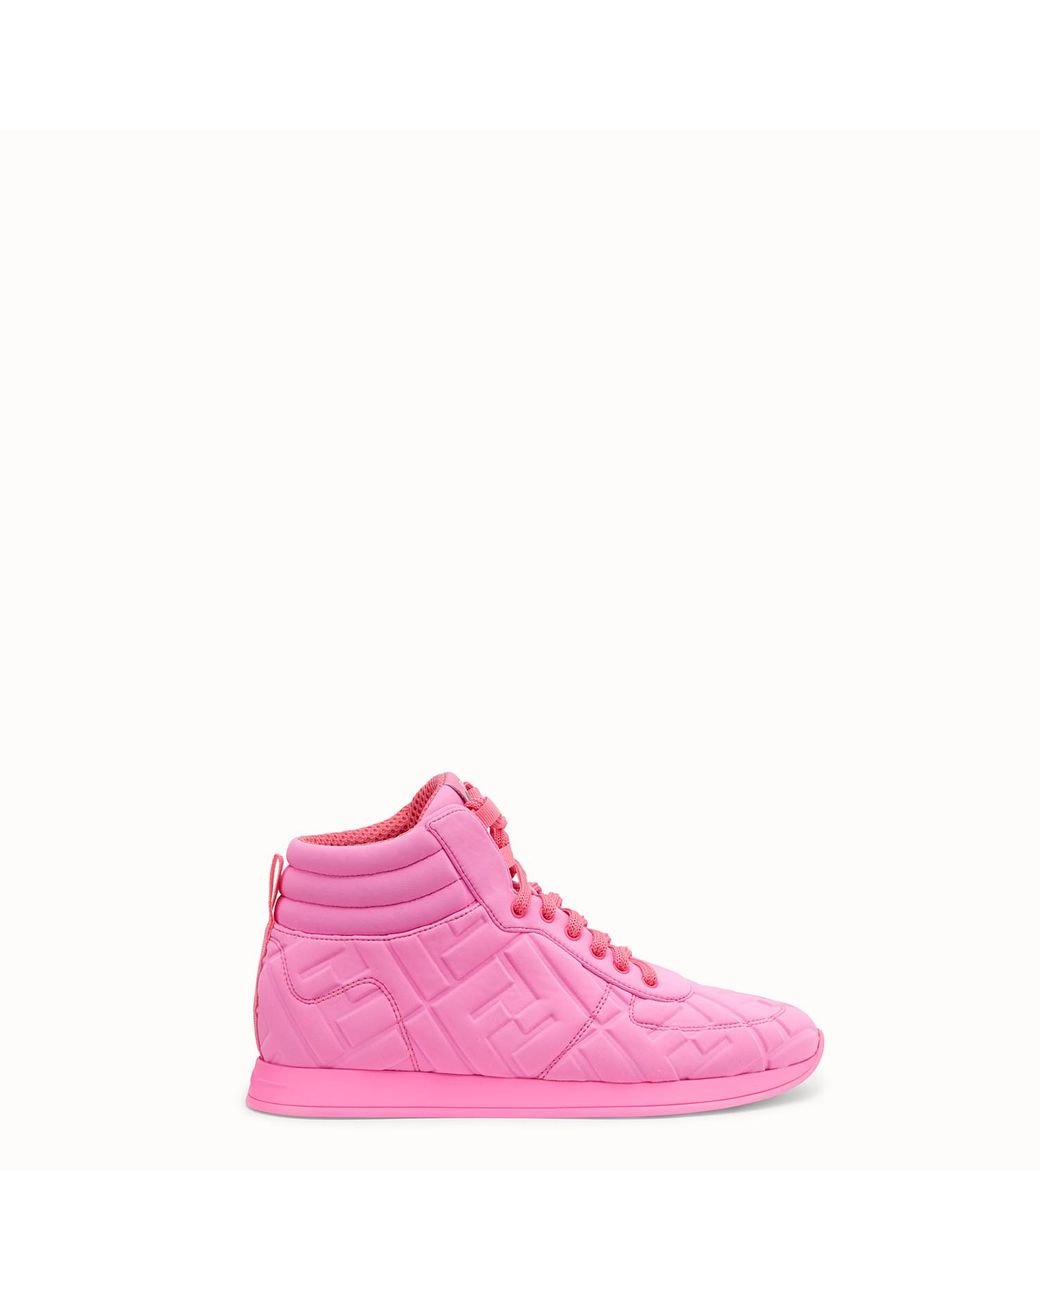 Fendi Synthetic Sneakers in Pink (White) - Lyst